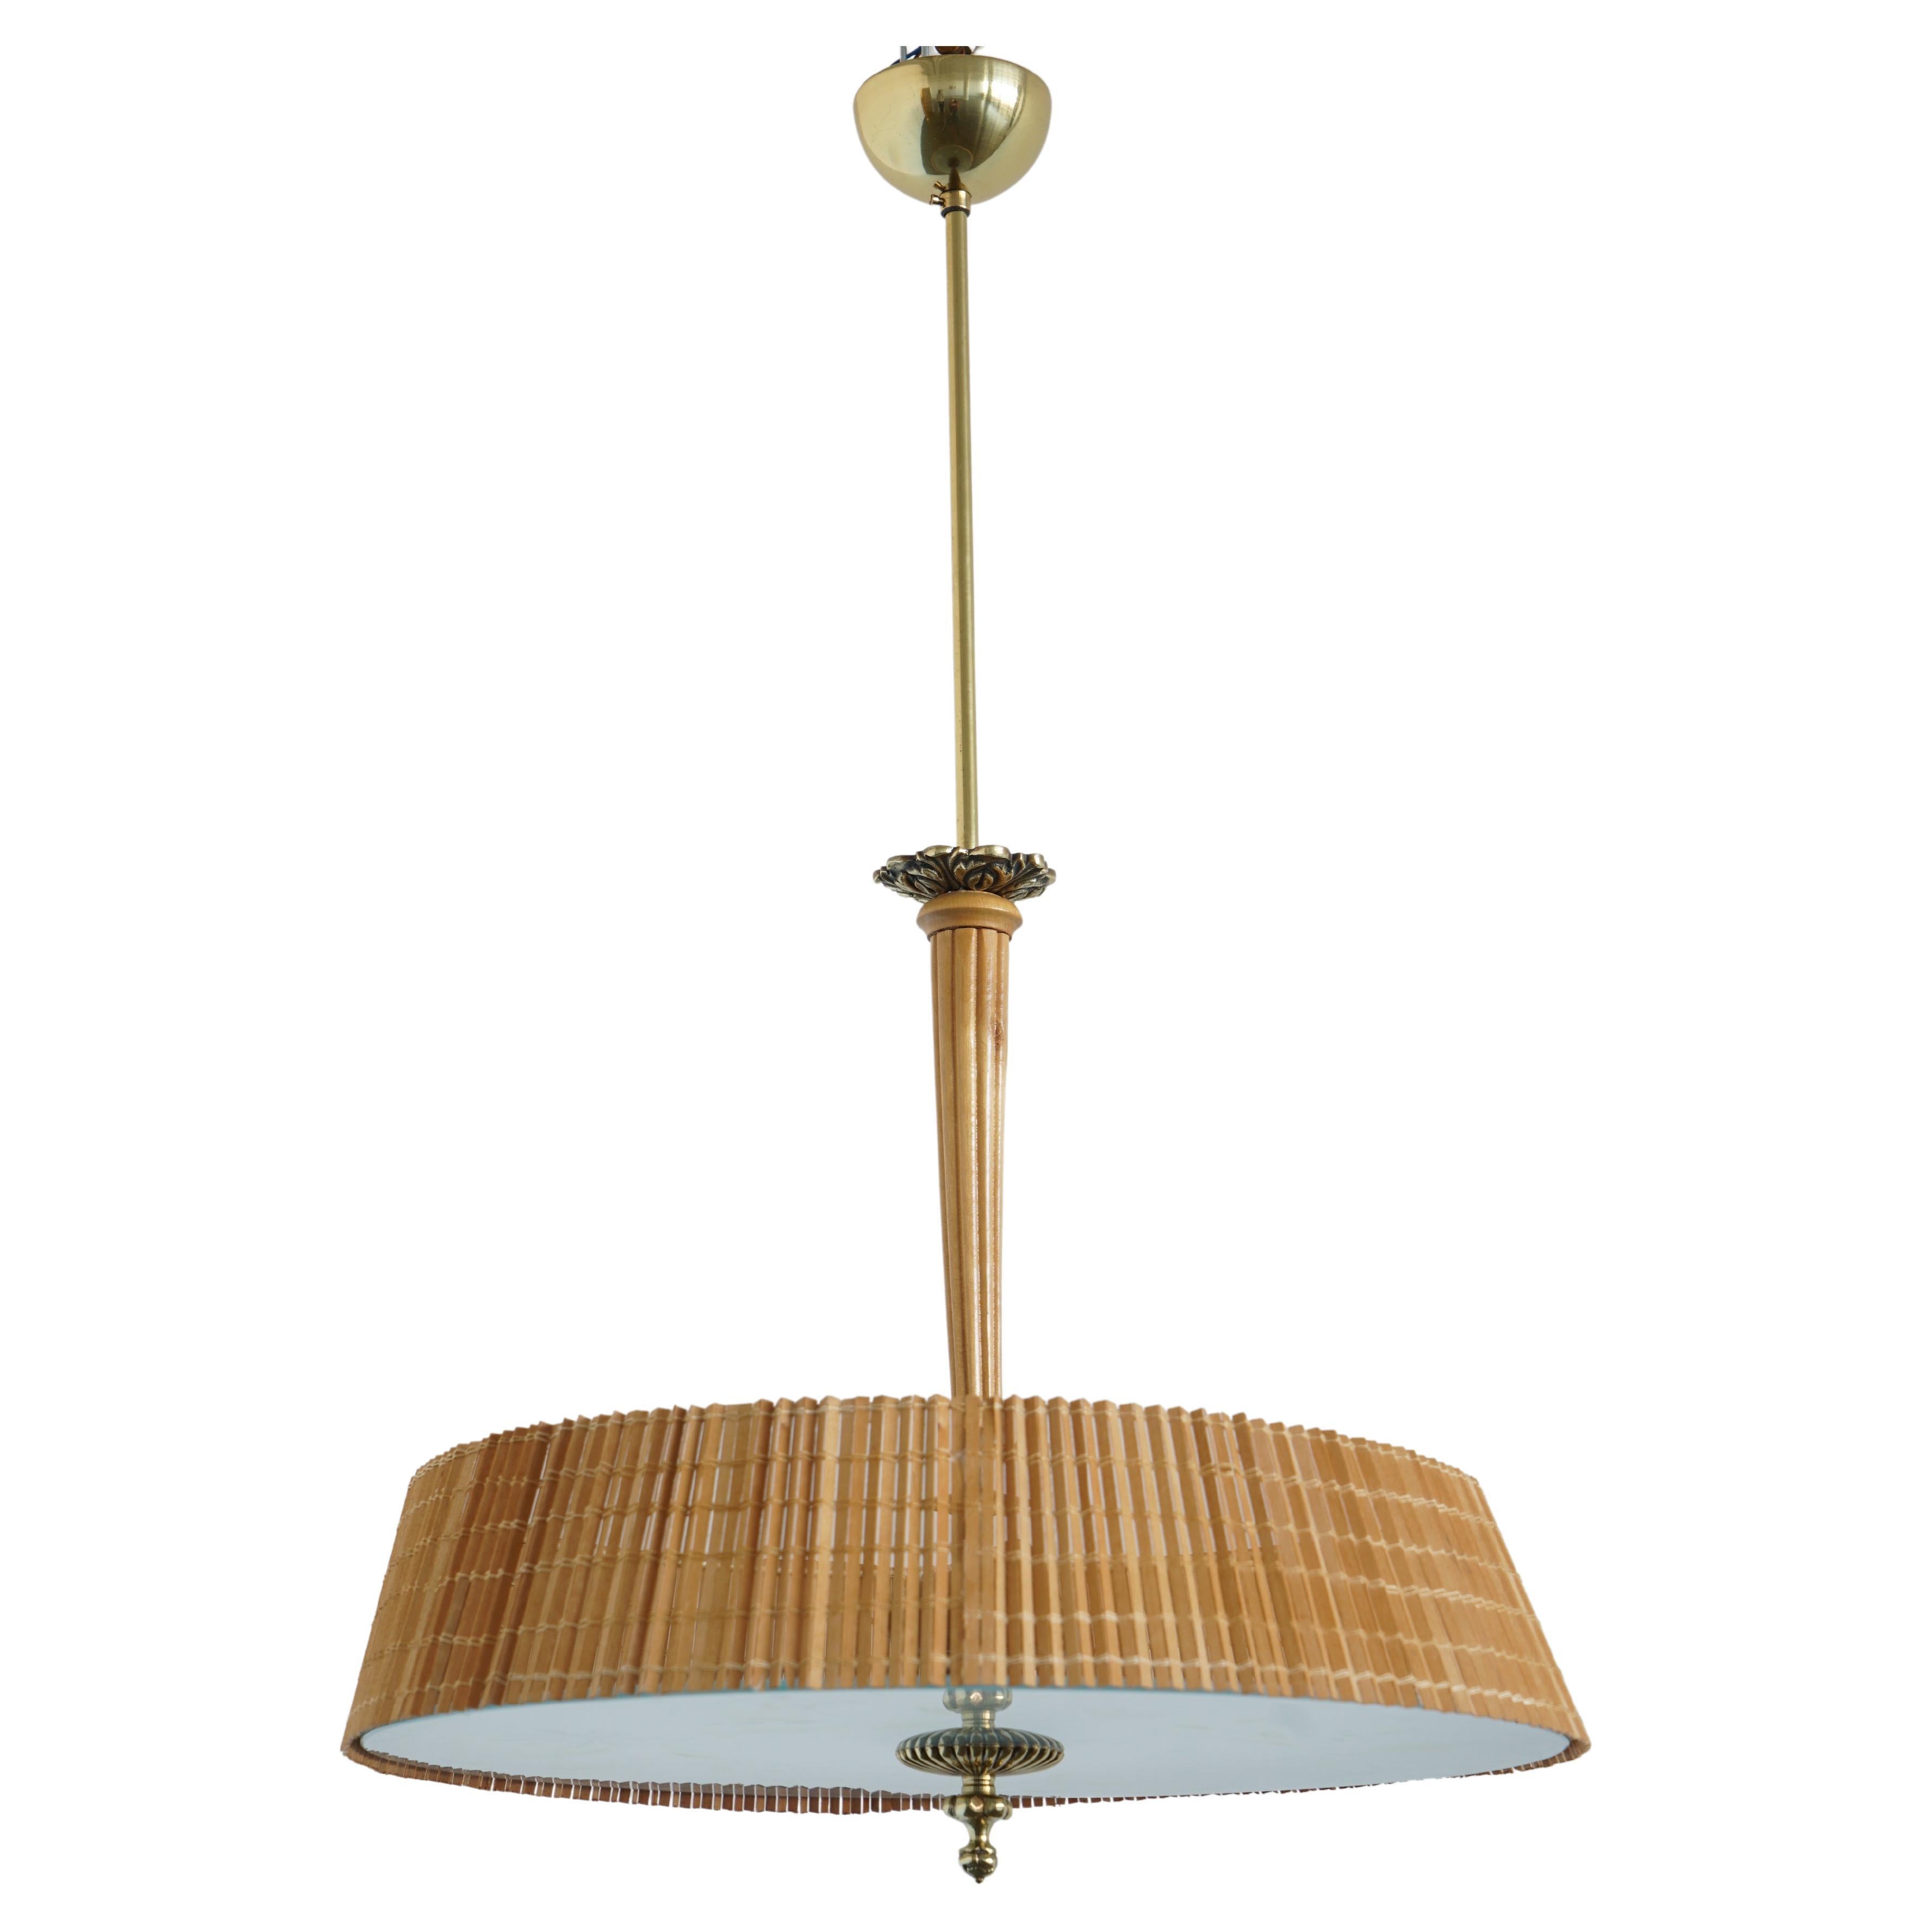 Pendant by Paavo Tynell with Diffuser Pained by Kyllikki Salmenhaara For Sale